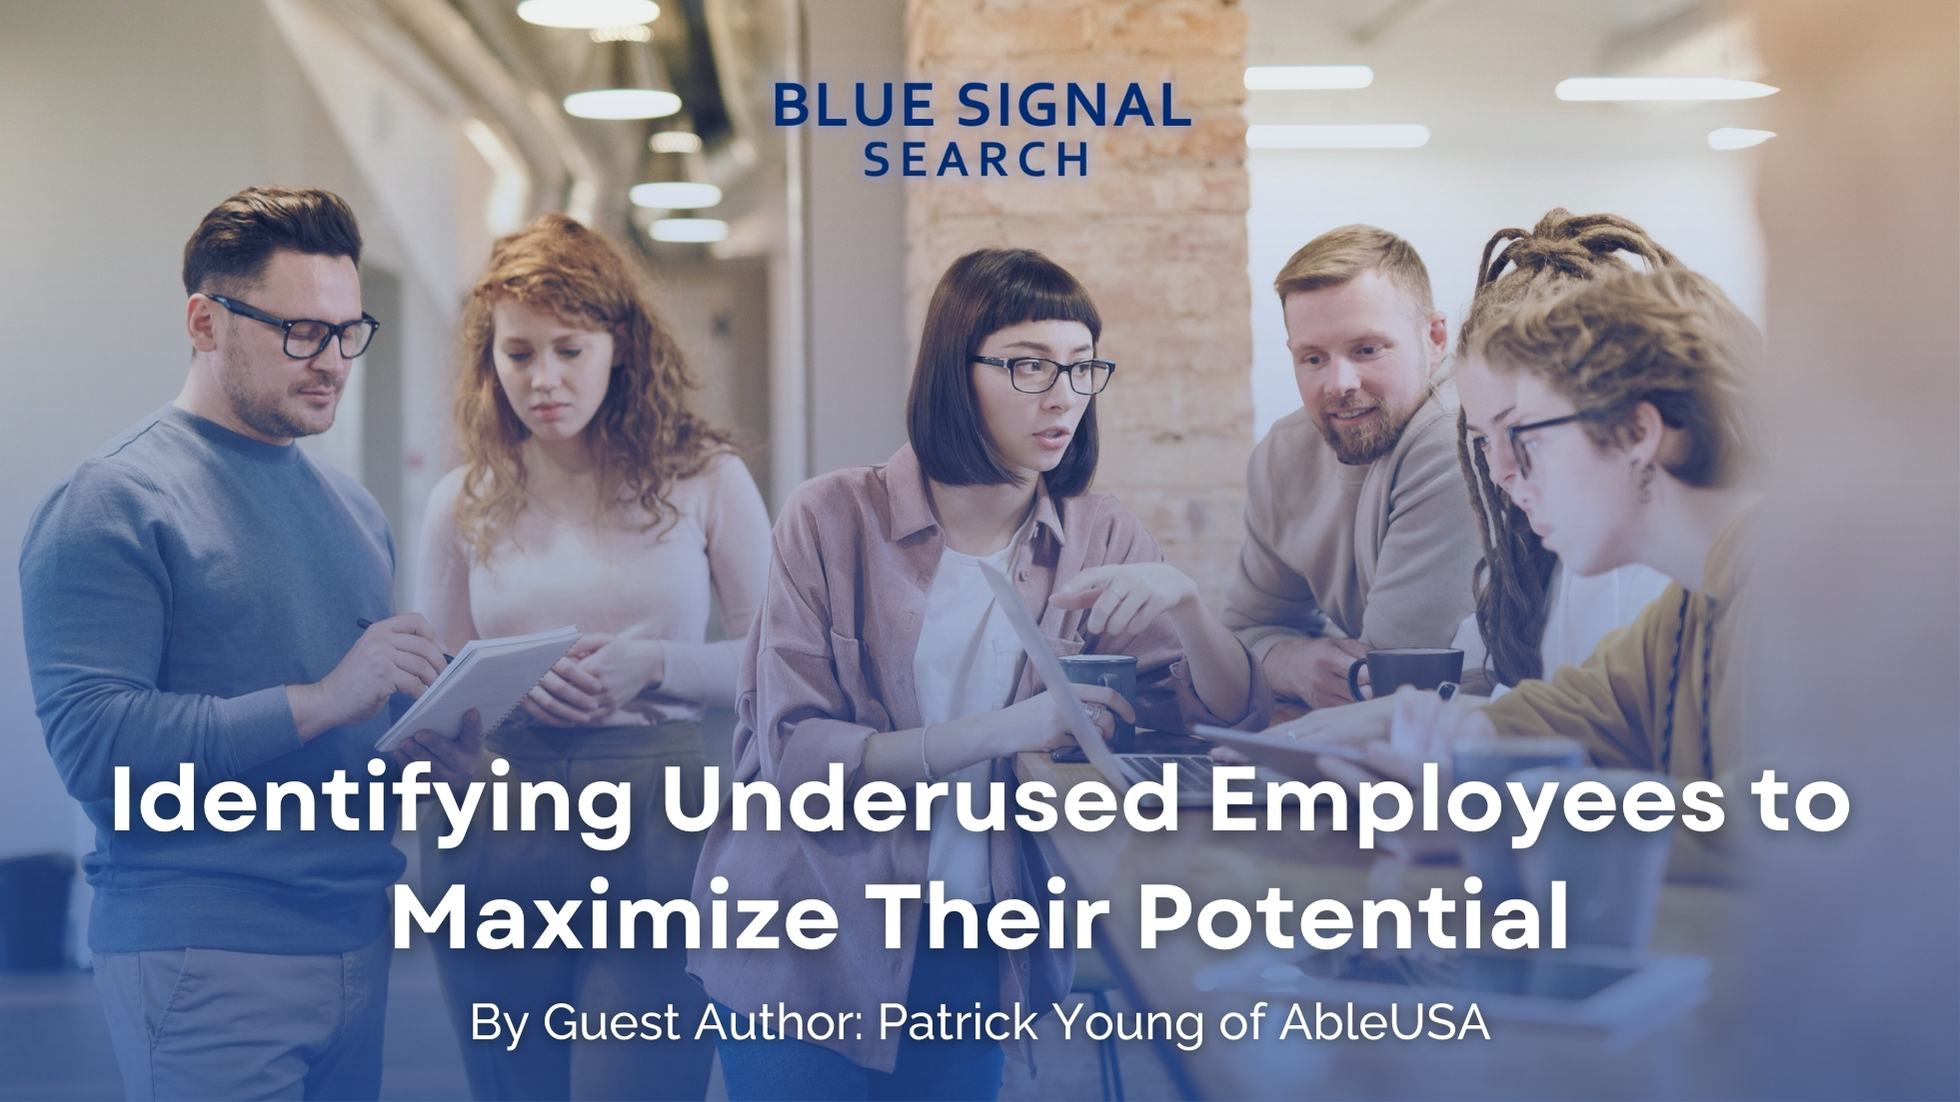 A team engaging in a collaborative discussion, highlighting the topic of the blog 'Identifying Underused Employees to Maximize Their Potential' by guest author Patrick Young.